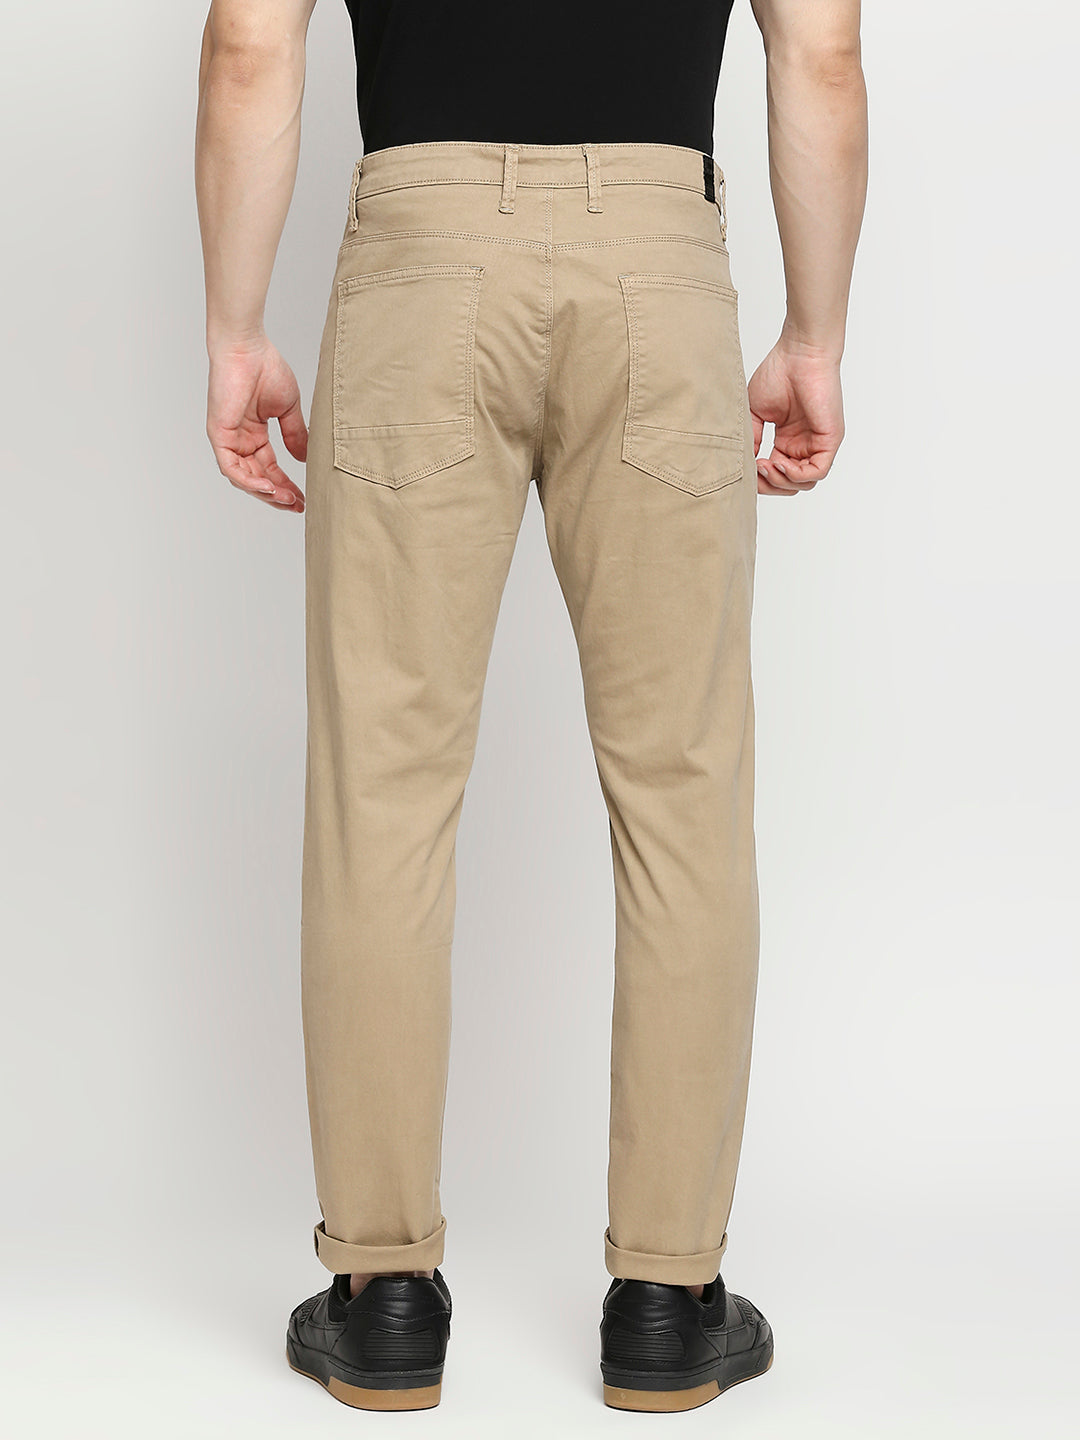 Buy Camel Beige Chinos for Men Online in India at Beyoung